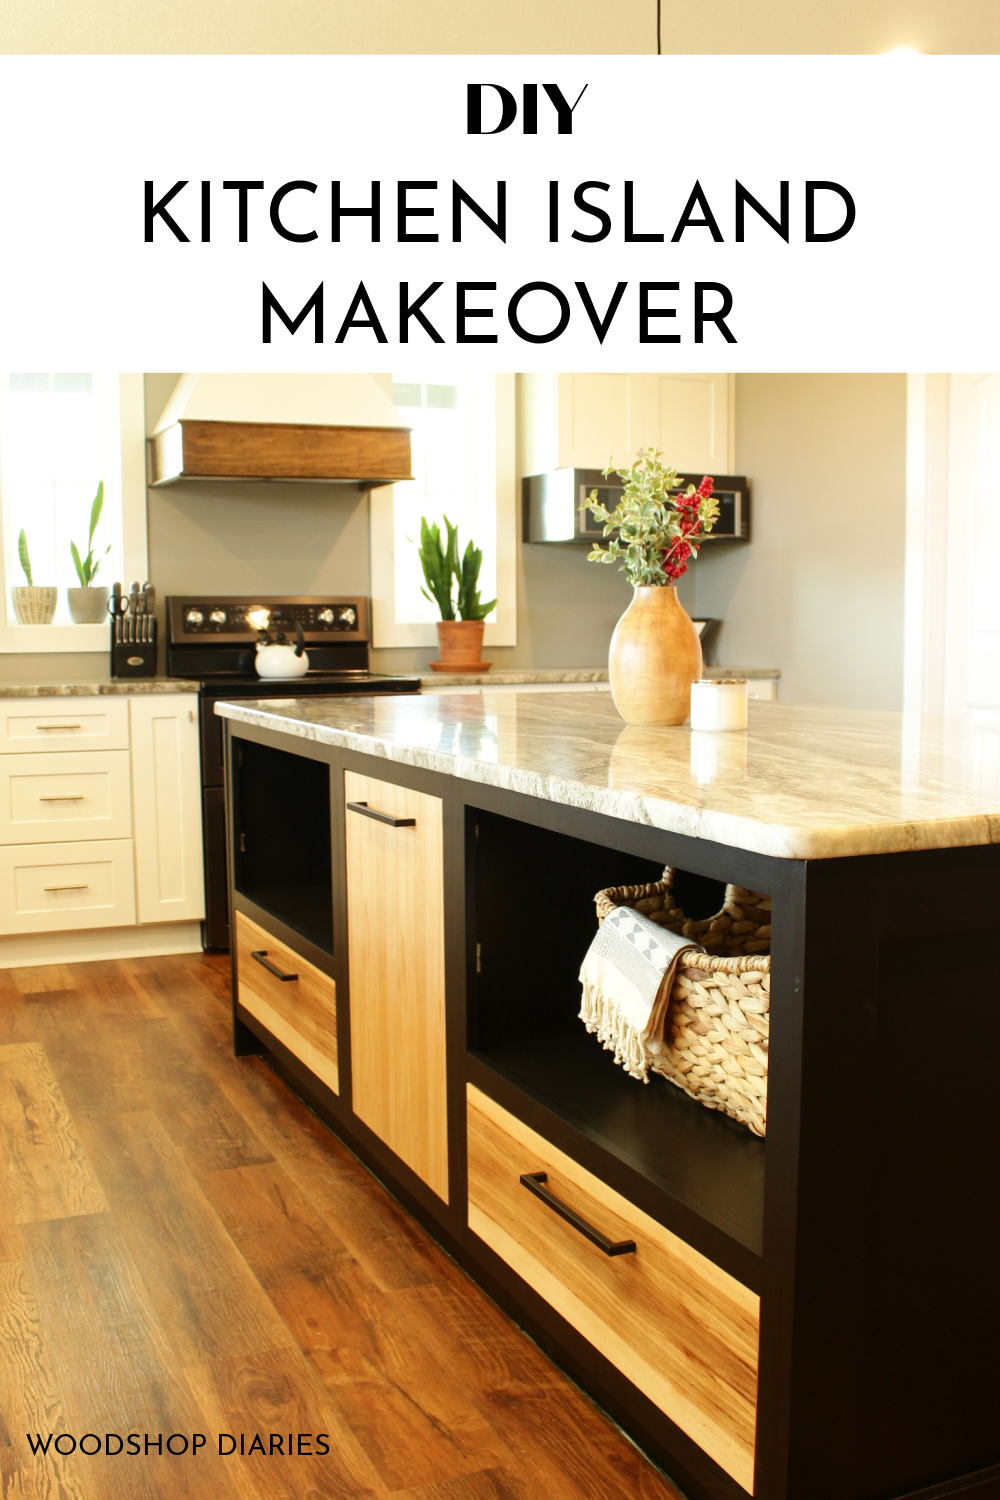 Vertical image of black and wood kitchen island with granite countertop with graphic and text that reads "DIY kitchen island makeover)